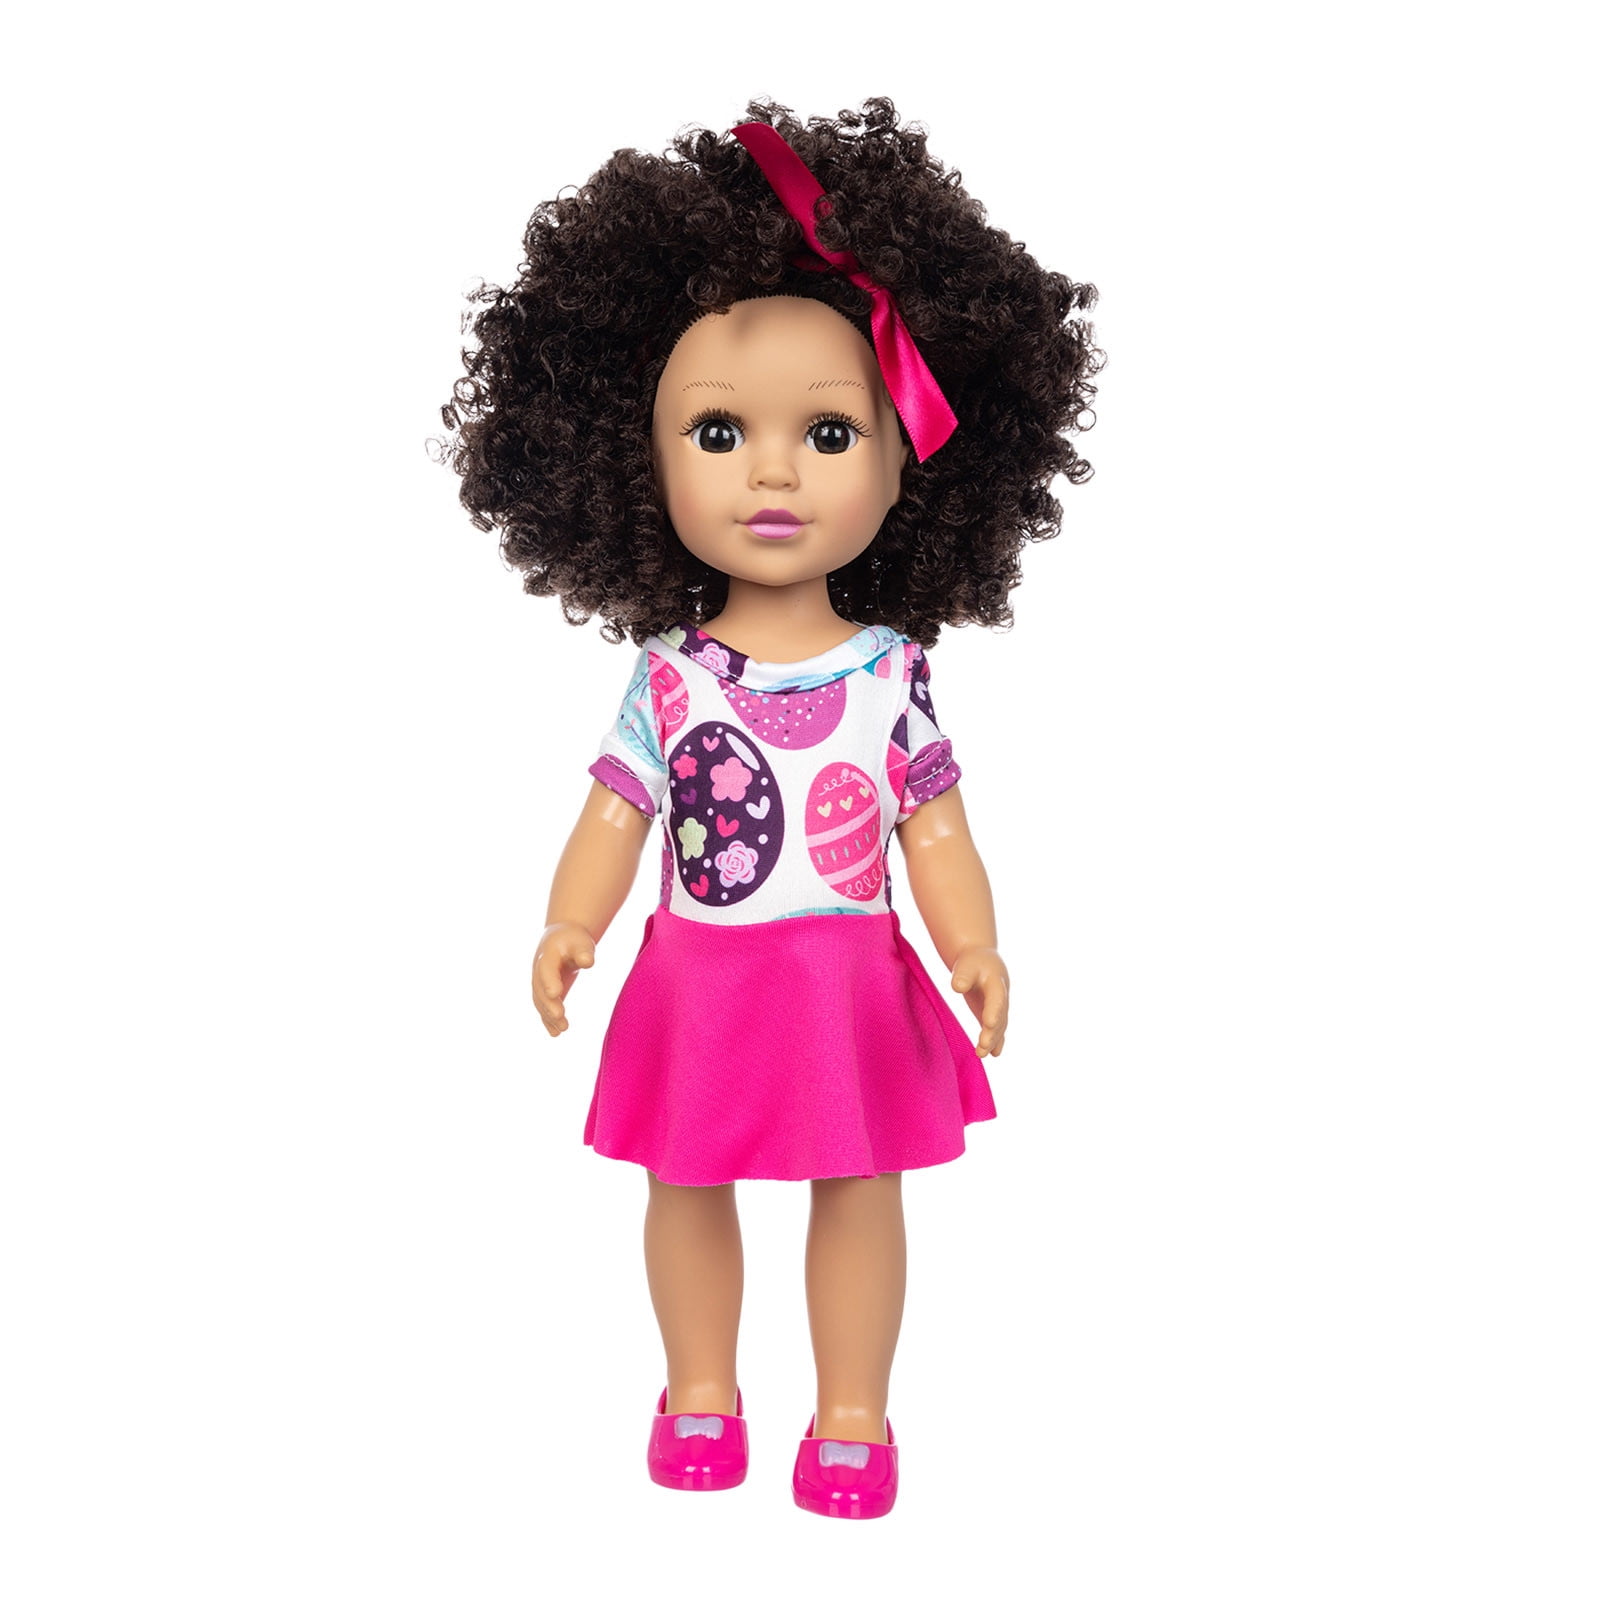 Details about   Newborn Baby Dolls Simulation Doll Black Skin Girl Doll Toy Kids Playmates Gift 